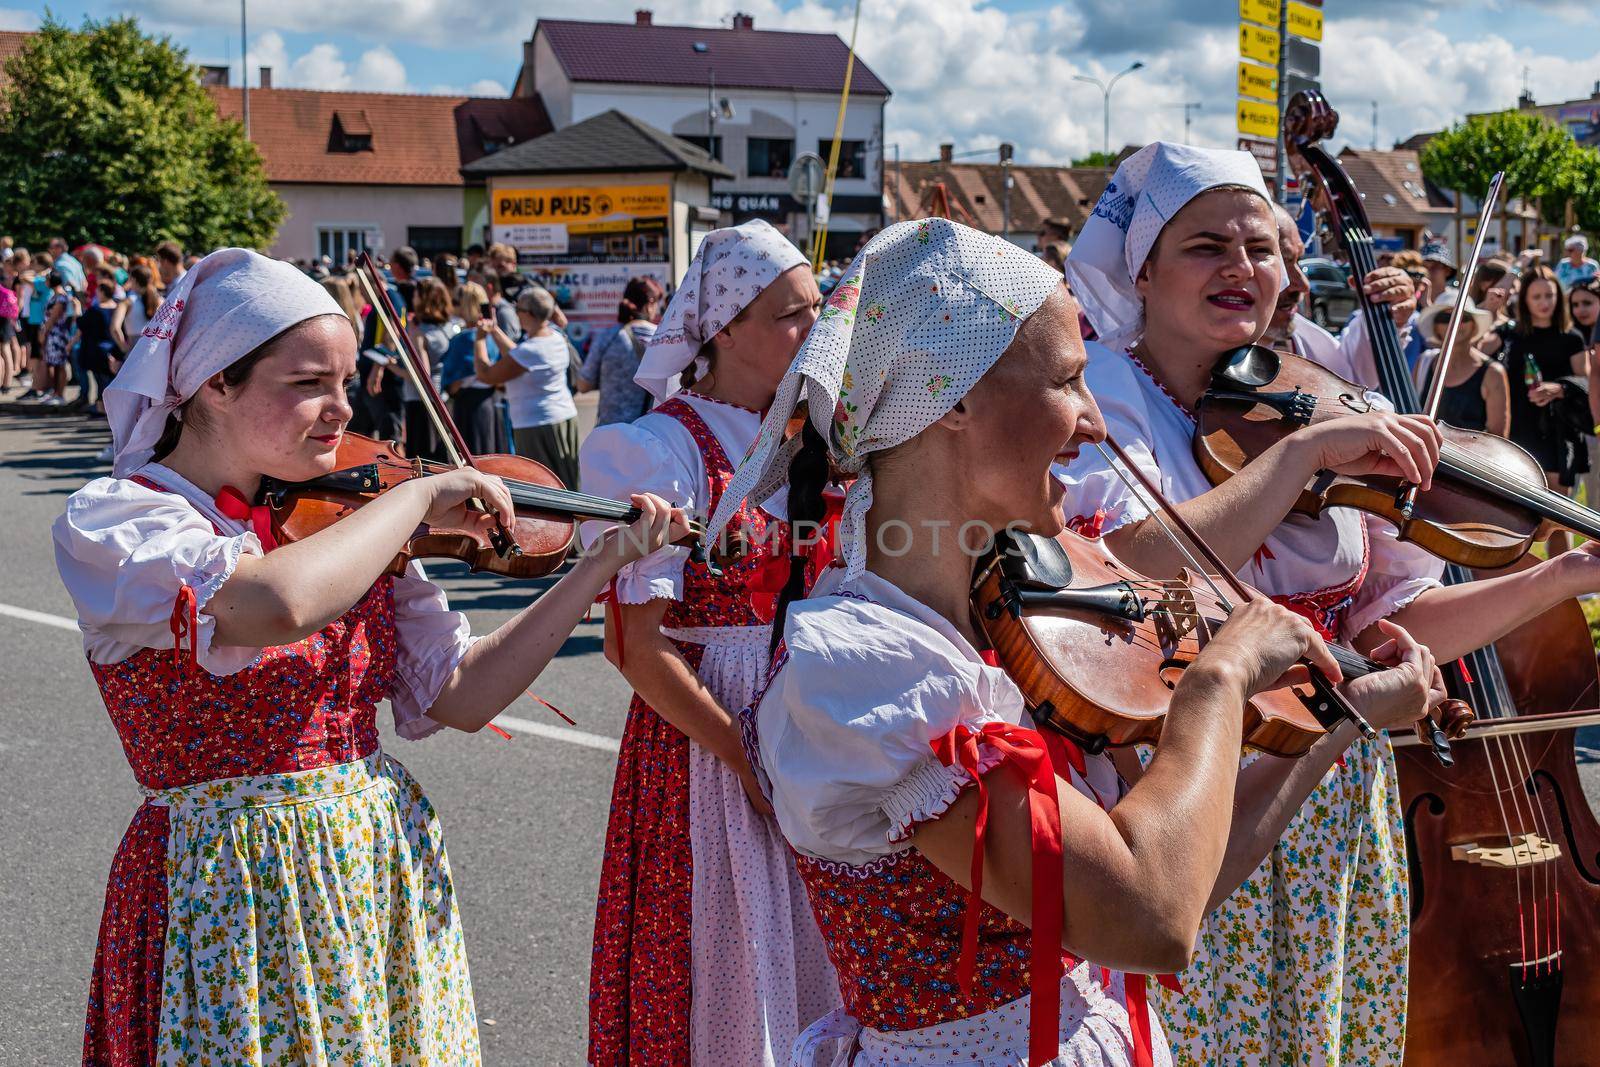 beautiful women play in the parade at the festival in Straznice by rostik924